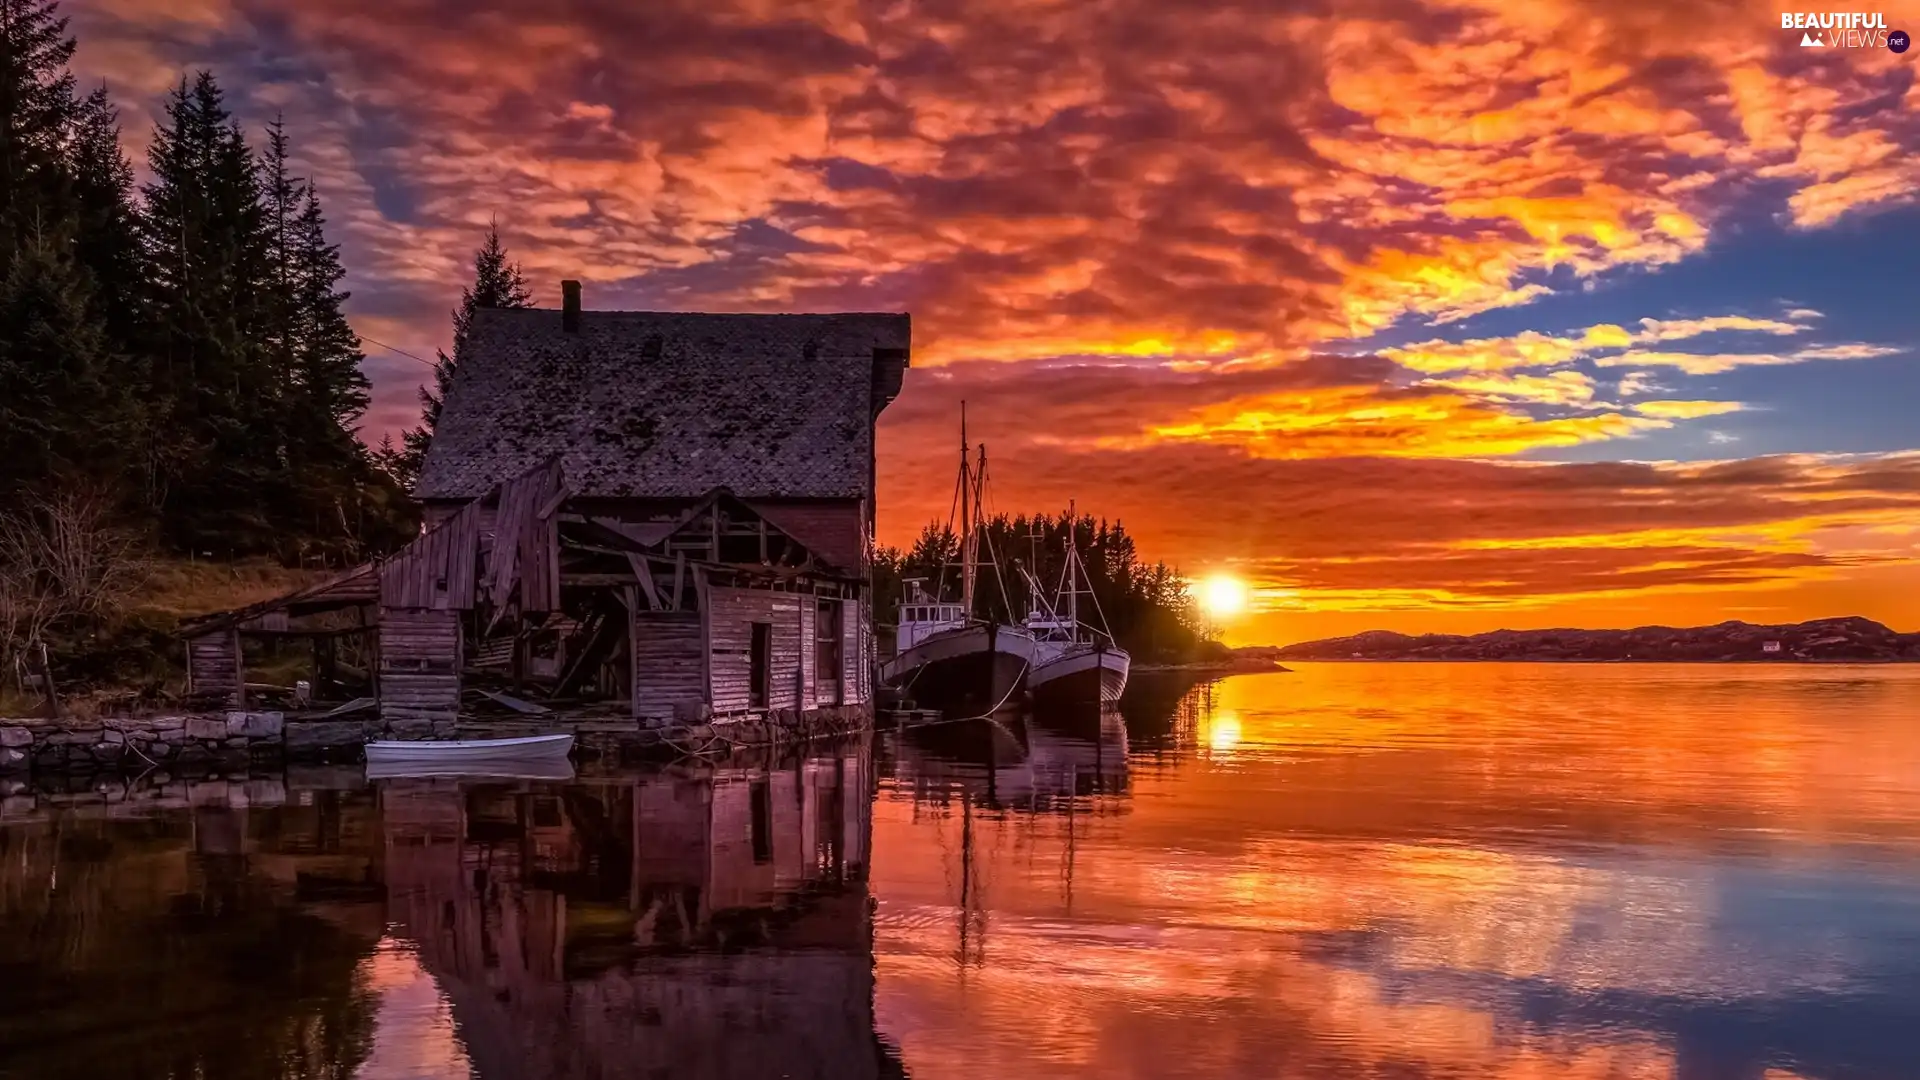 Cutters, Toftøya Island, Great Sunsets, North Sea, Norway, Boats, house